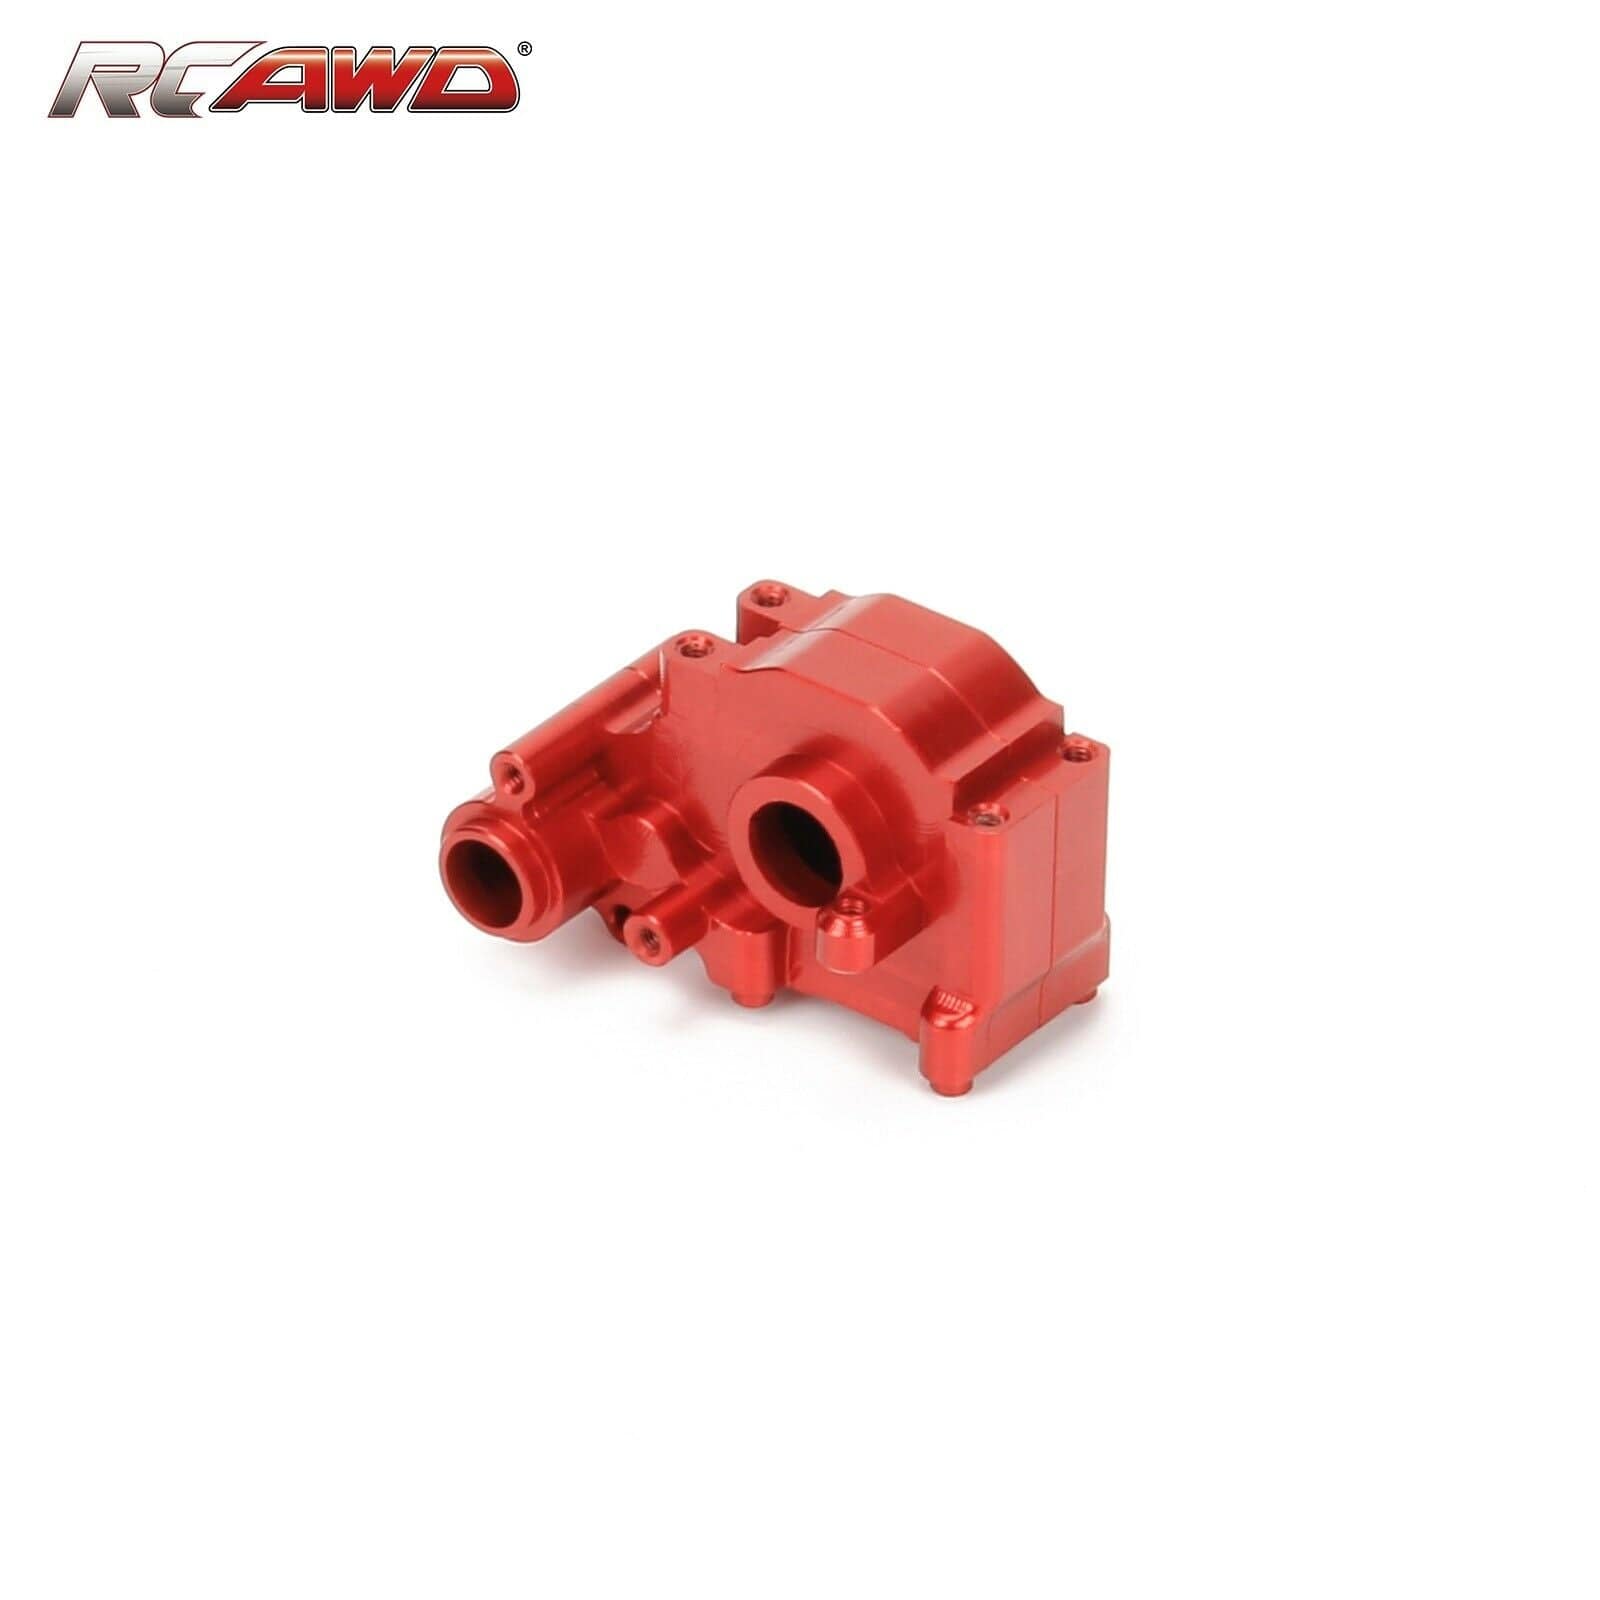 RCAWD Losi Mini-B & Pro mini-T 2WD Buggy Alloy Transmission Case Housing LOS212017- RCAWD